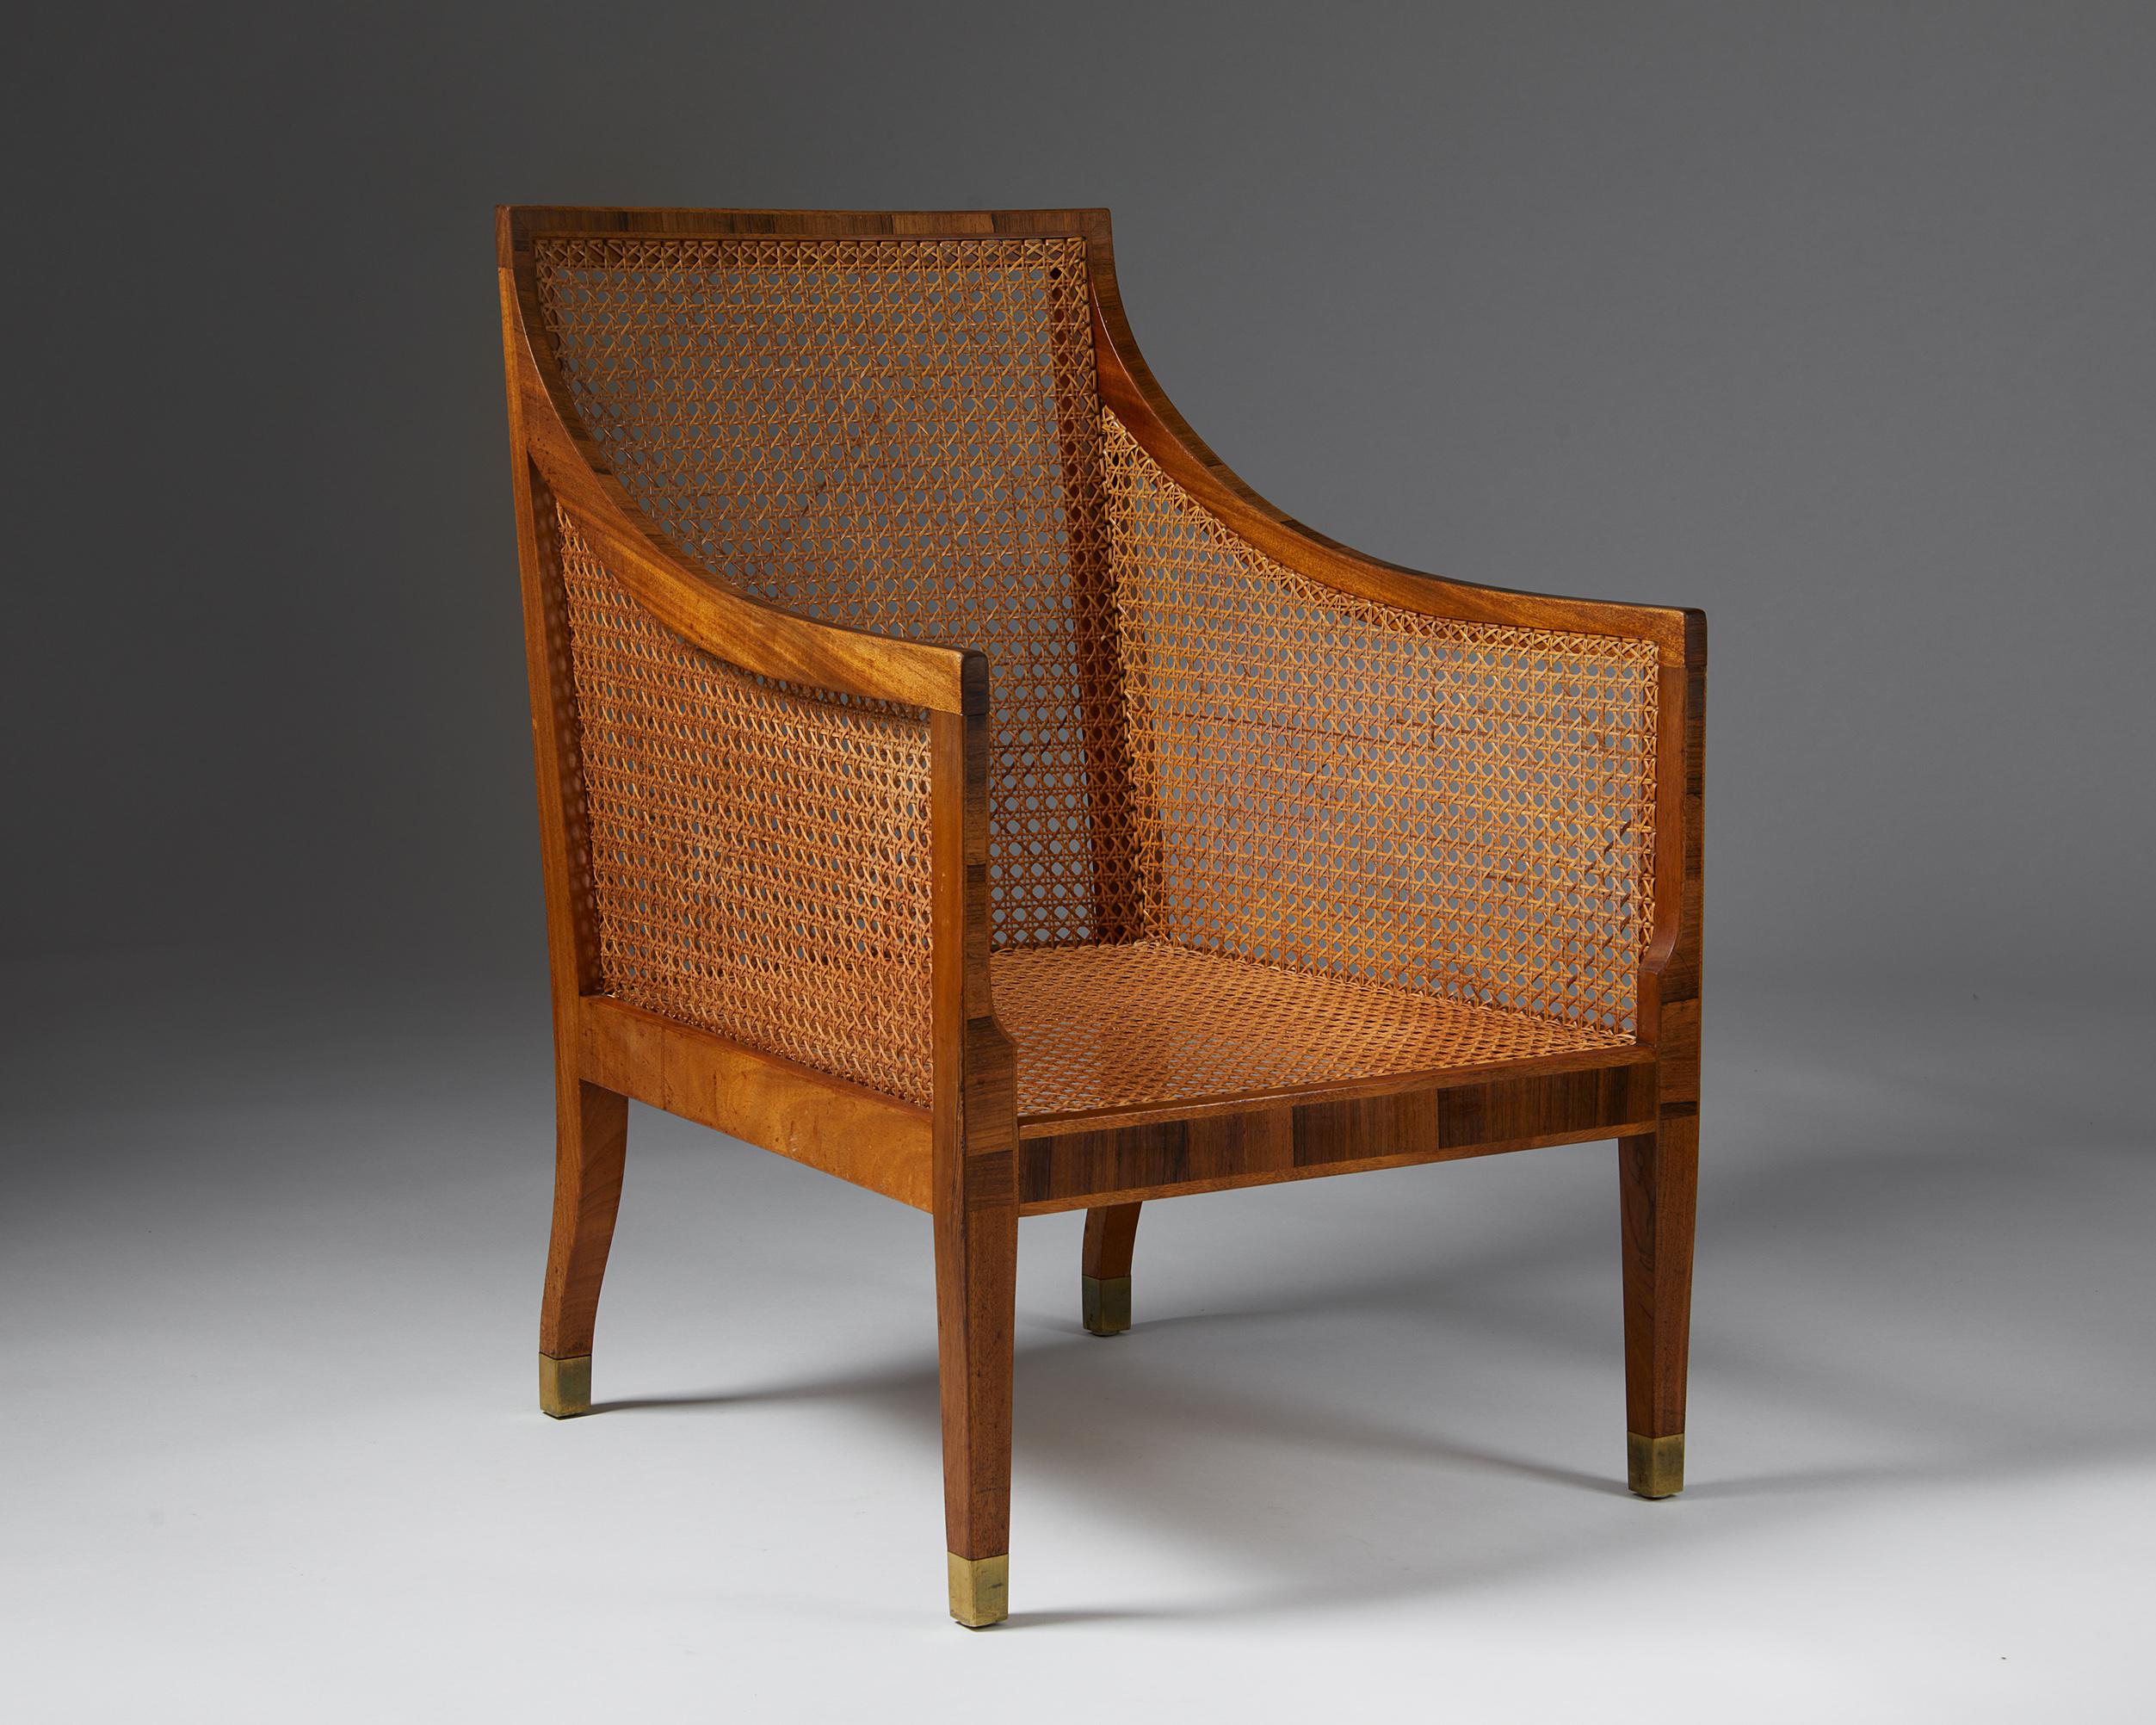 Armchair model 4488 designed by Kaare Klint for Rud. Rasmussen,
Denmark, 1931.
Mahogany with Brazilian rosewood inlays and woven cane.


Exquisite woodwork and canework make this piece by the Danish master Kaare Klint an exceptional example of